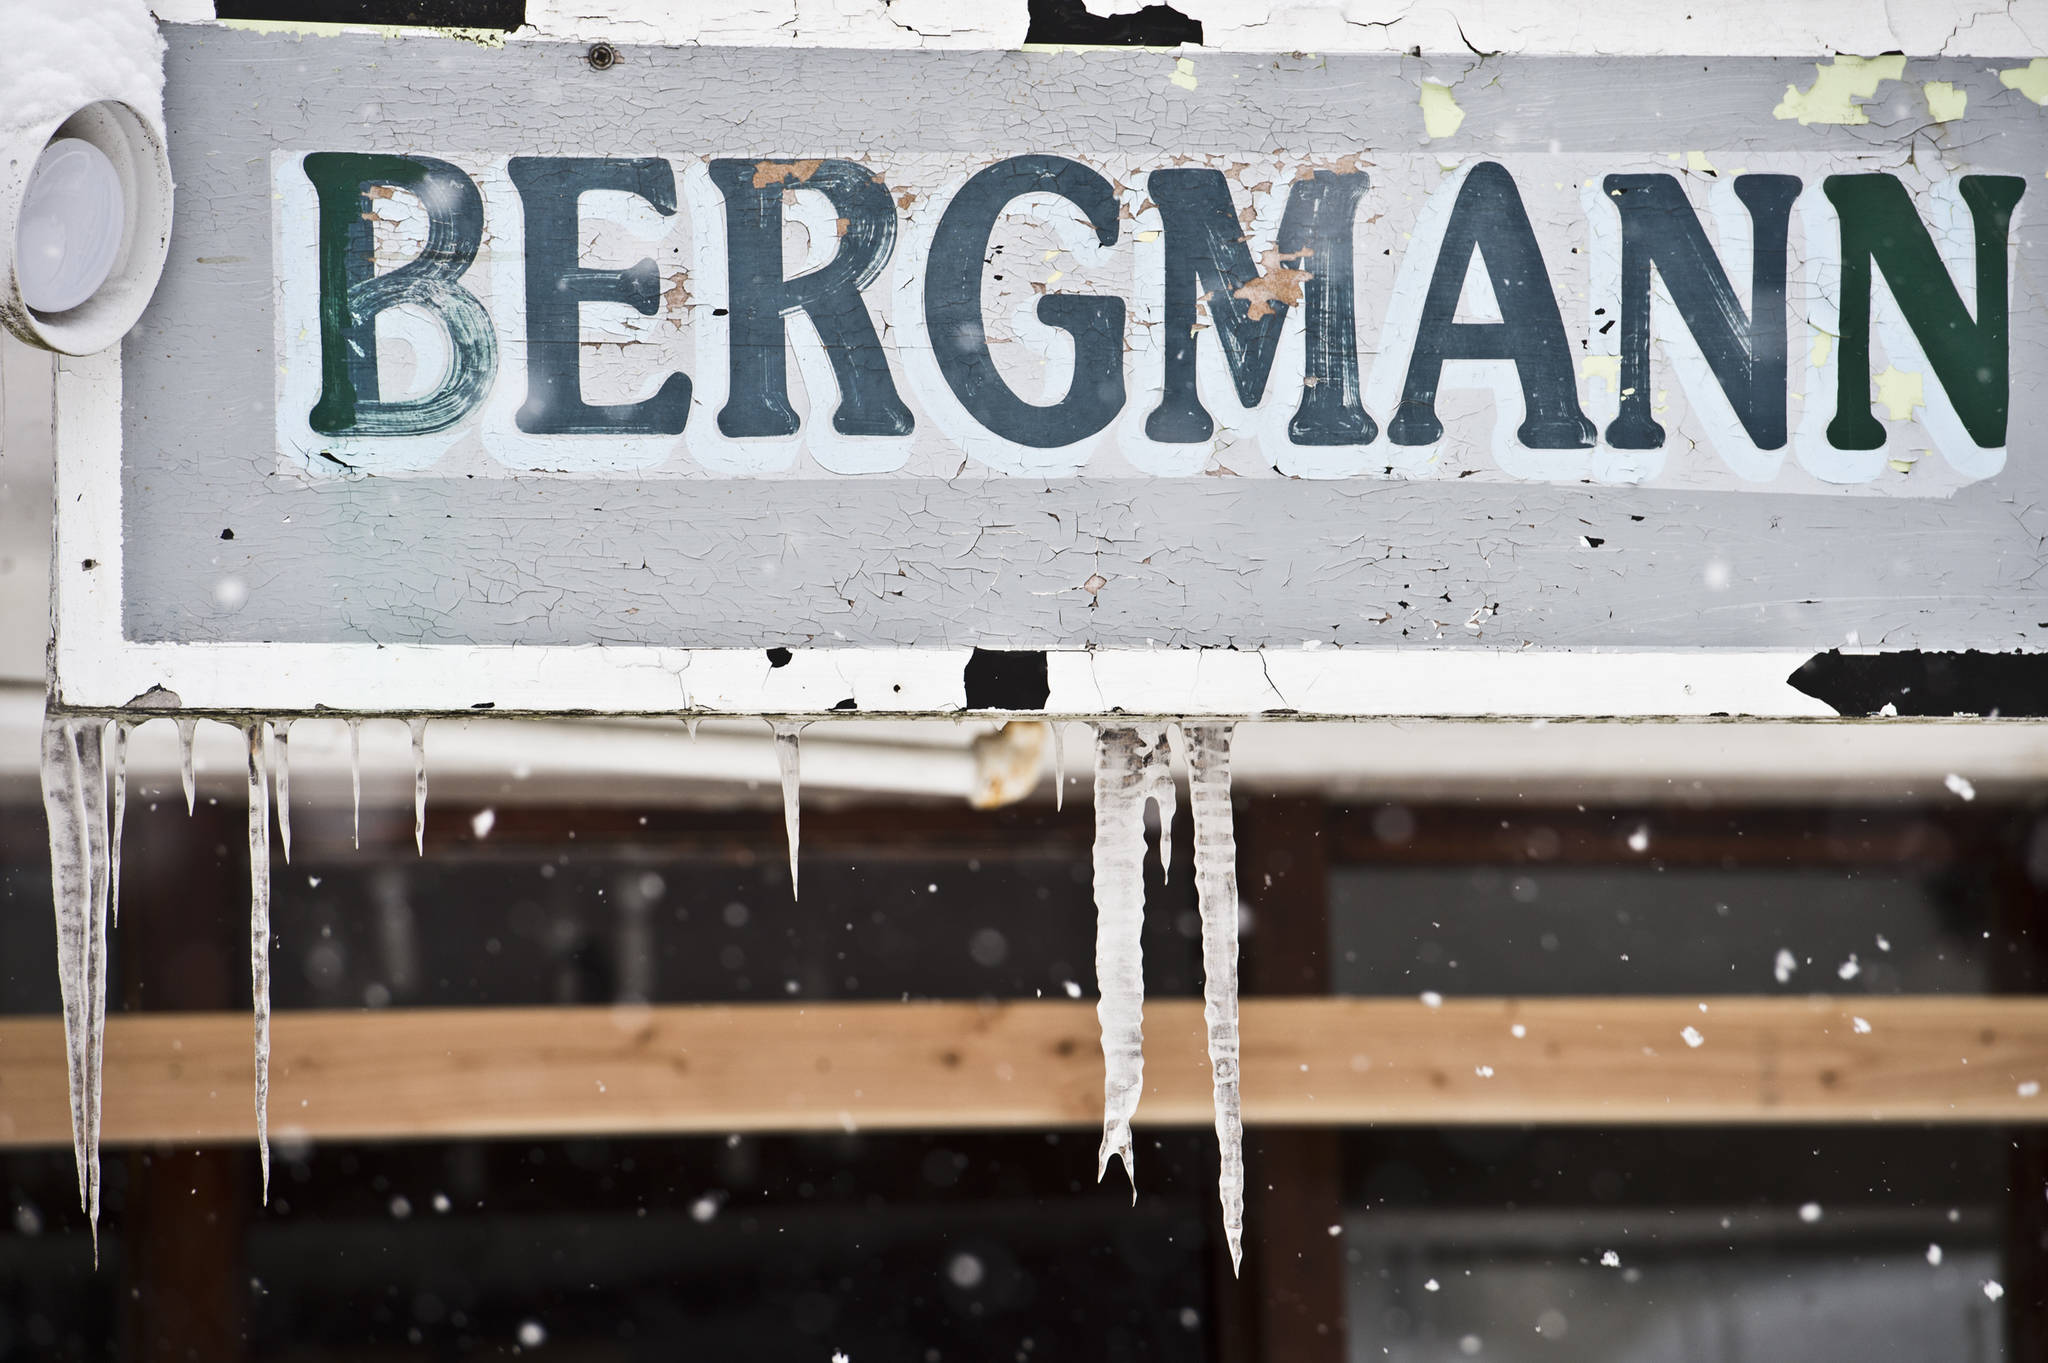 Chipped paint and icycles hang from the Bergmann Hotel sign on Monday, March 13, 2017. (Michael Penn | Juneau Empire)